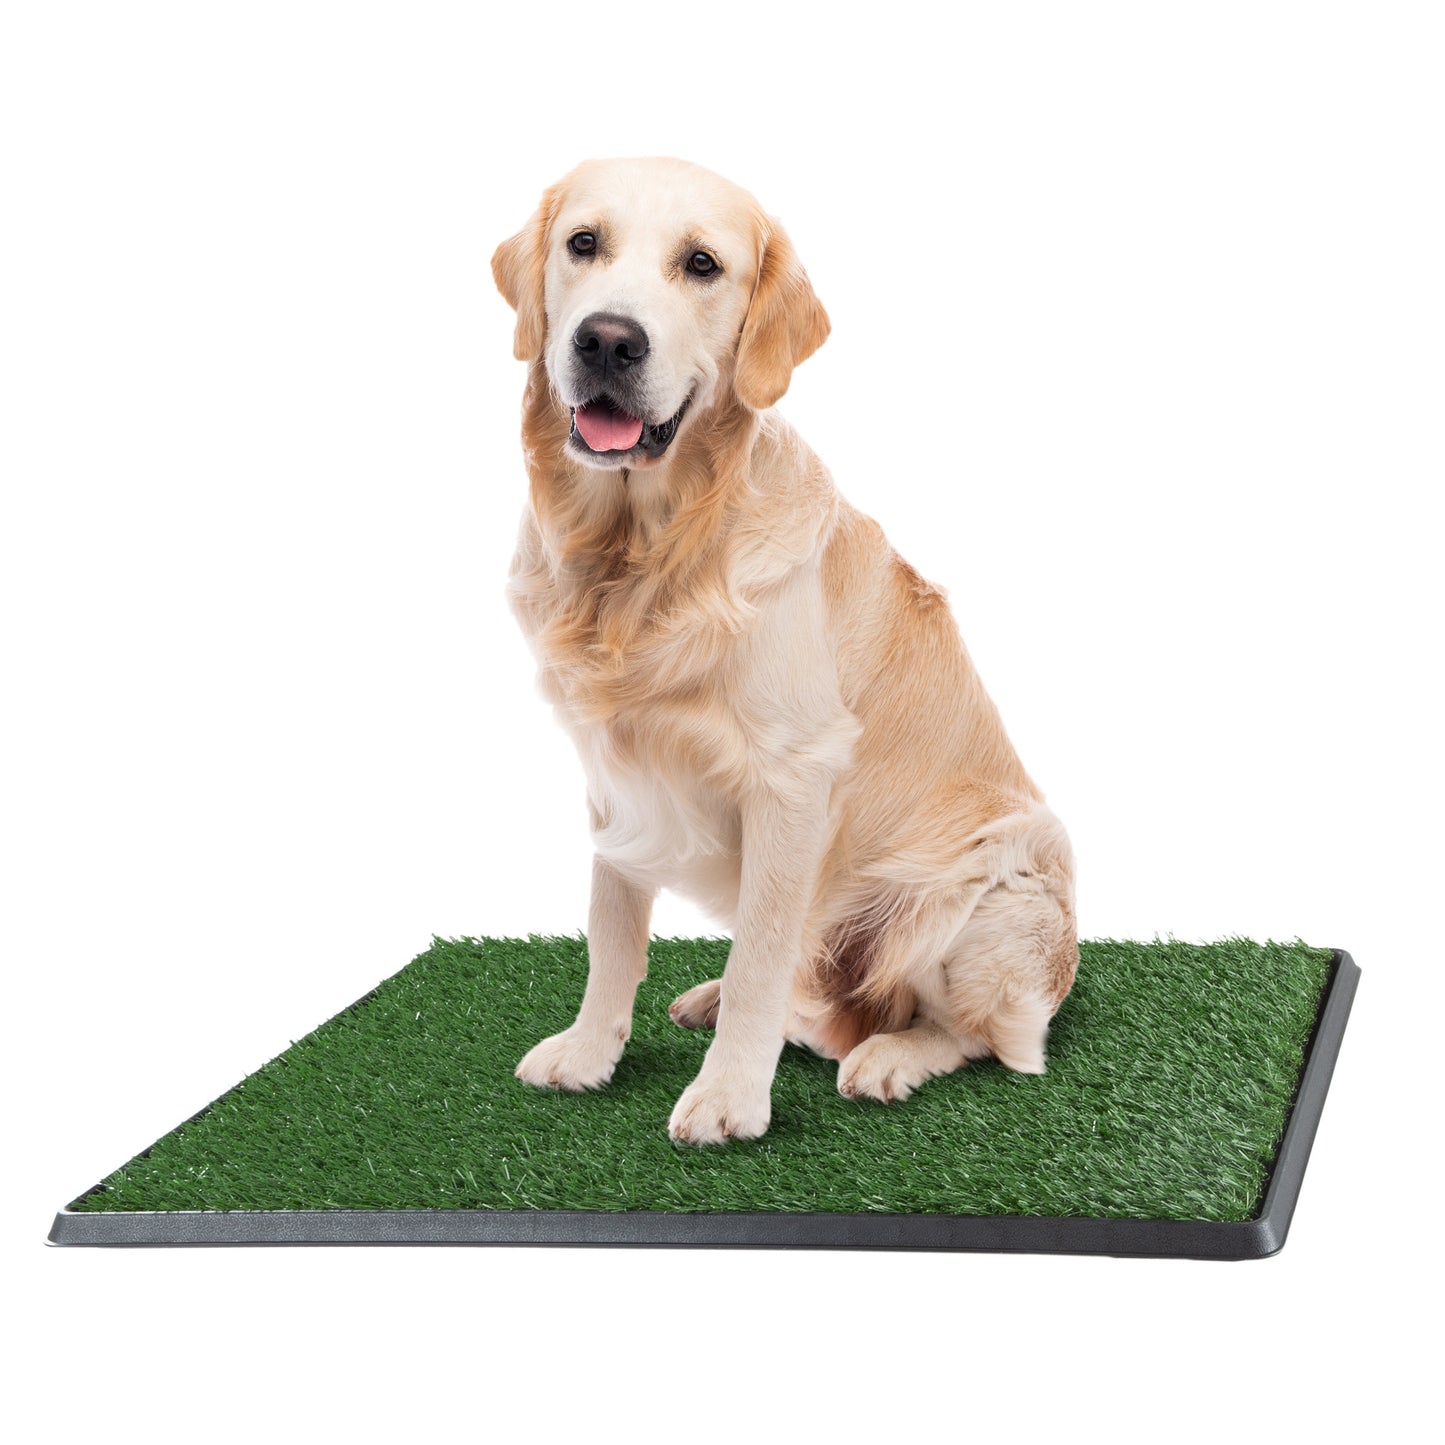 Golden Retriever sits on a pee pad so that the carpet is not soiled when I work long days at work.  